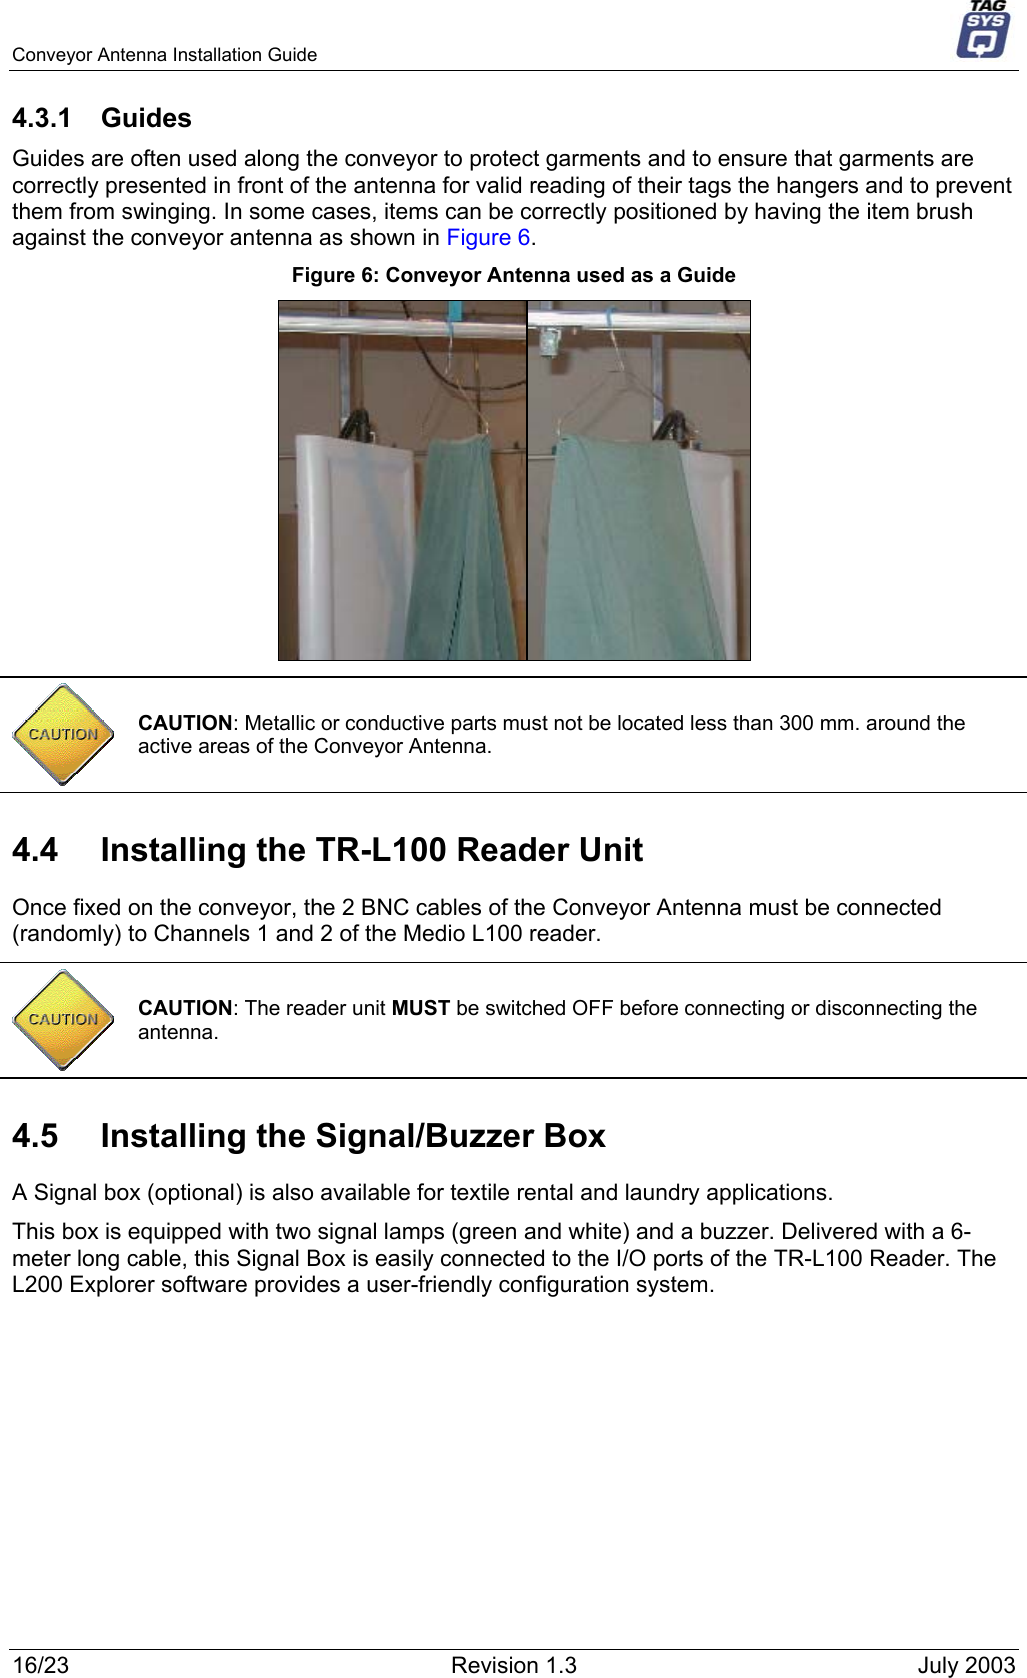 Conveyor Antenna Installation Guide     4.3.1 Guides Guides are often used along the conveyor to protect garments and to ensure that garments are correctly presented in front of the antenna for valid reading of their tags the hangers and to prevent them from swinging. In some cases, items can be correctly positioned by having the item brush against the conveyor antenna as shown in Figure 6. Figure 6: Conveyor Antenna used as a Guide   CAUTION: Metallic or conductive parts must not be located less than 300 mm. around the active areas of the Conveyor Antenna. 4.4  Installing the TR-L100 Reader Unit Once fixed on the conveyor, the 2 BNC cables of the Conveyor Antenna must be connected (randomly) to Channels 1 and 2 of the Medio L100 reader.  CAUTION: The reader unit MUST be switched OFF before connecting or disconnecting the antenna. 4.5  Installing the Signal/Buzzer Box A Signal box (optional) is also available for textile rental and laundry applications. This box is equipped with two signal lamps (green and white) and a buzzer. Delivered with a 6-meter long cable, this Signal Box is easily connected to the I/O ports of the TR-L100 Reader. The L200 Explorer software provides a user-friendly configuration system. 16/23  Revision 1.3  July 2003 